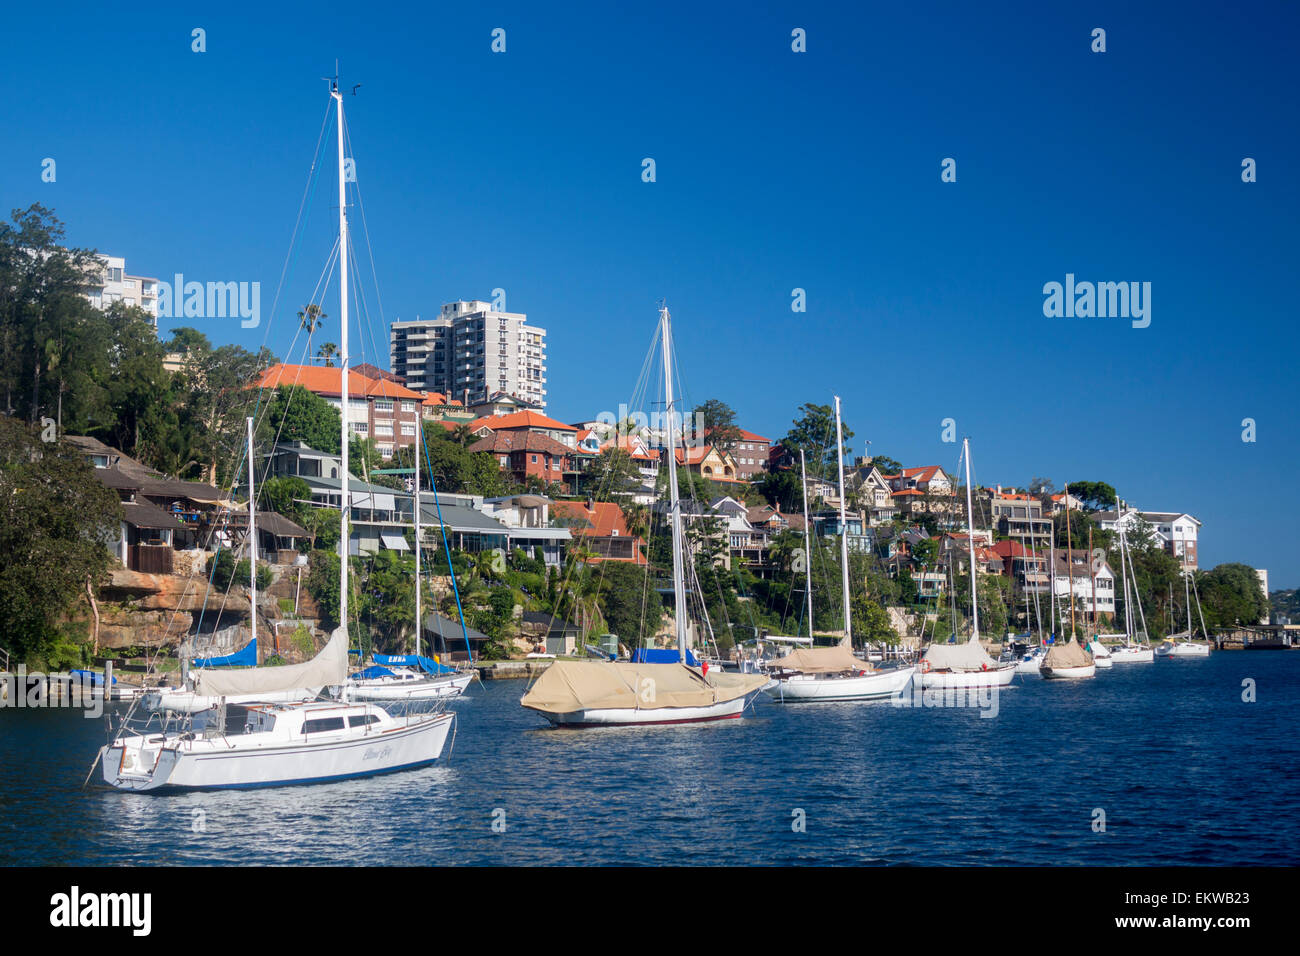 Mosman Harbour or Mosman Bay with boats, looking out to Port Jackson North Shore suburbs Sydney New South Wales NSW Australia Stock Photo